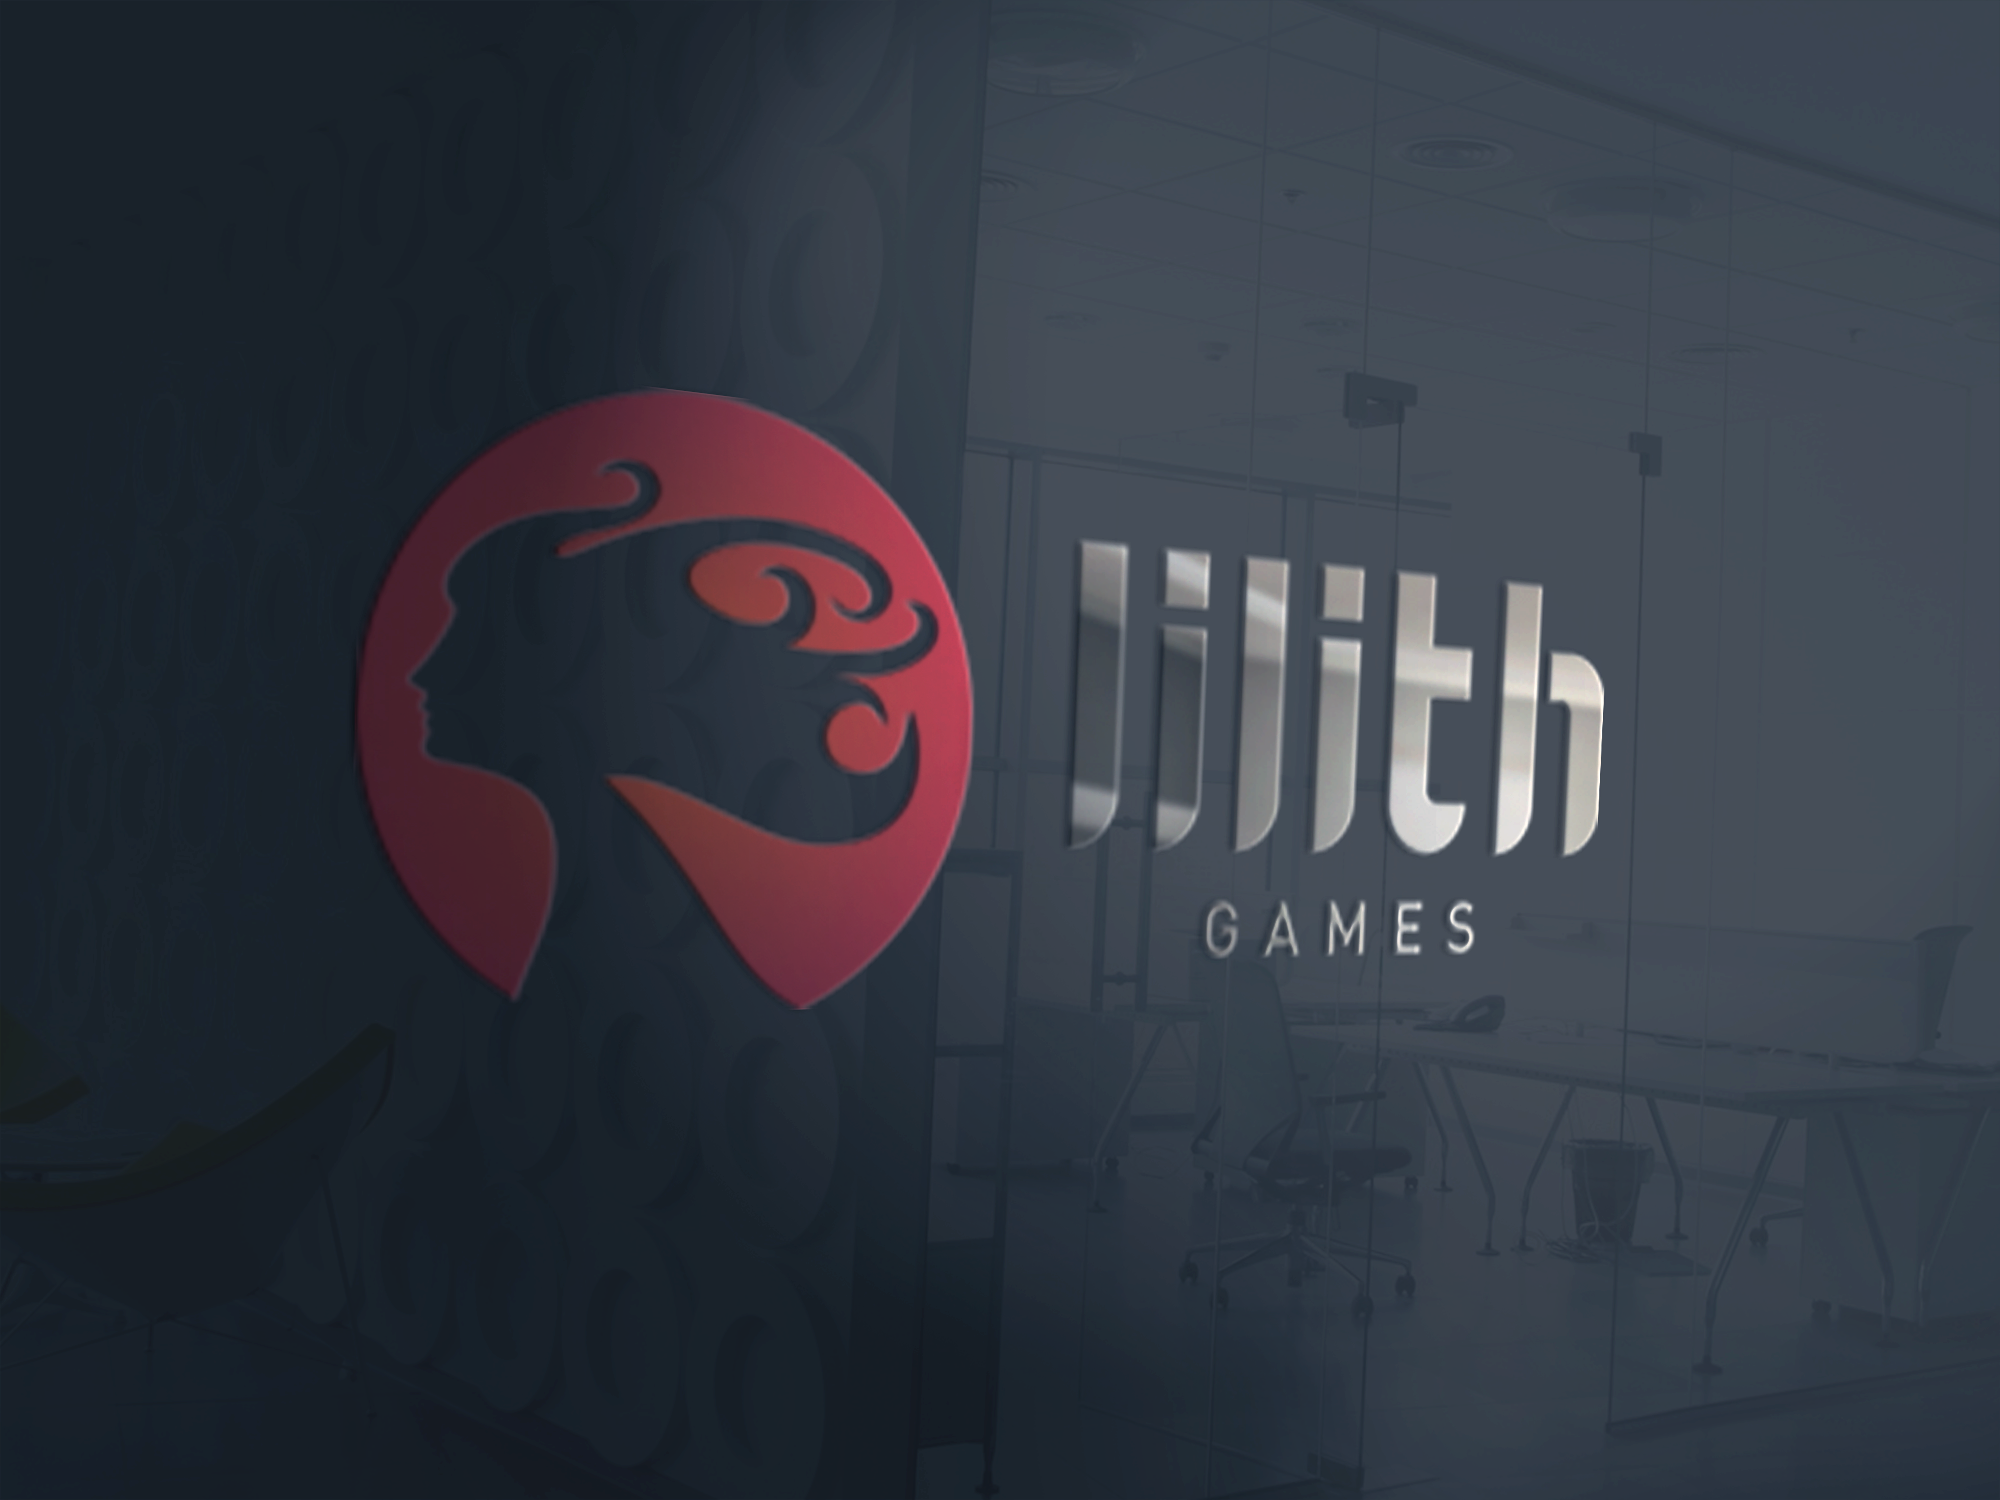  Lilith Games